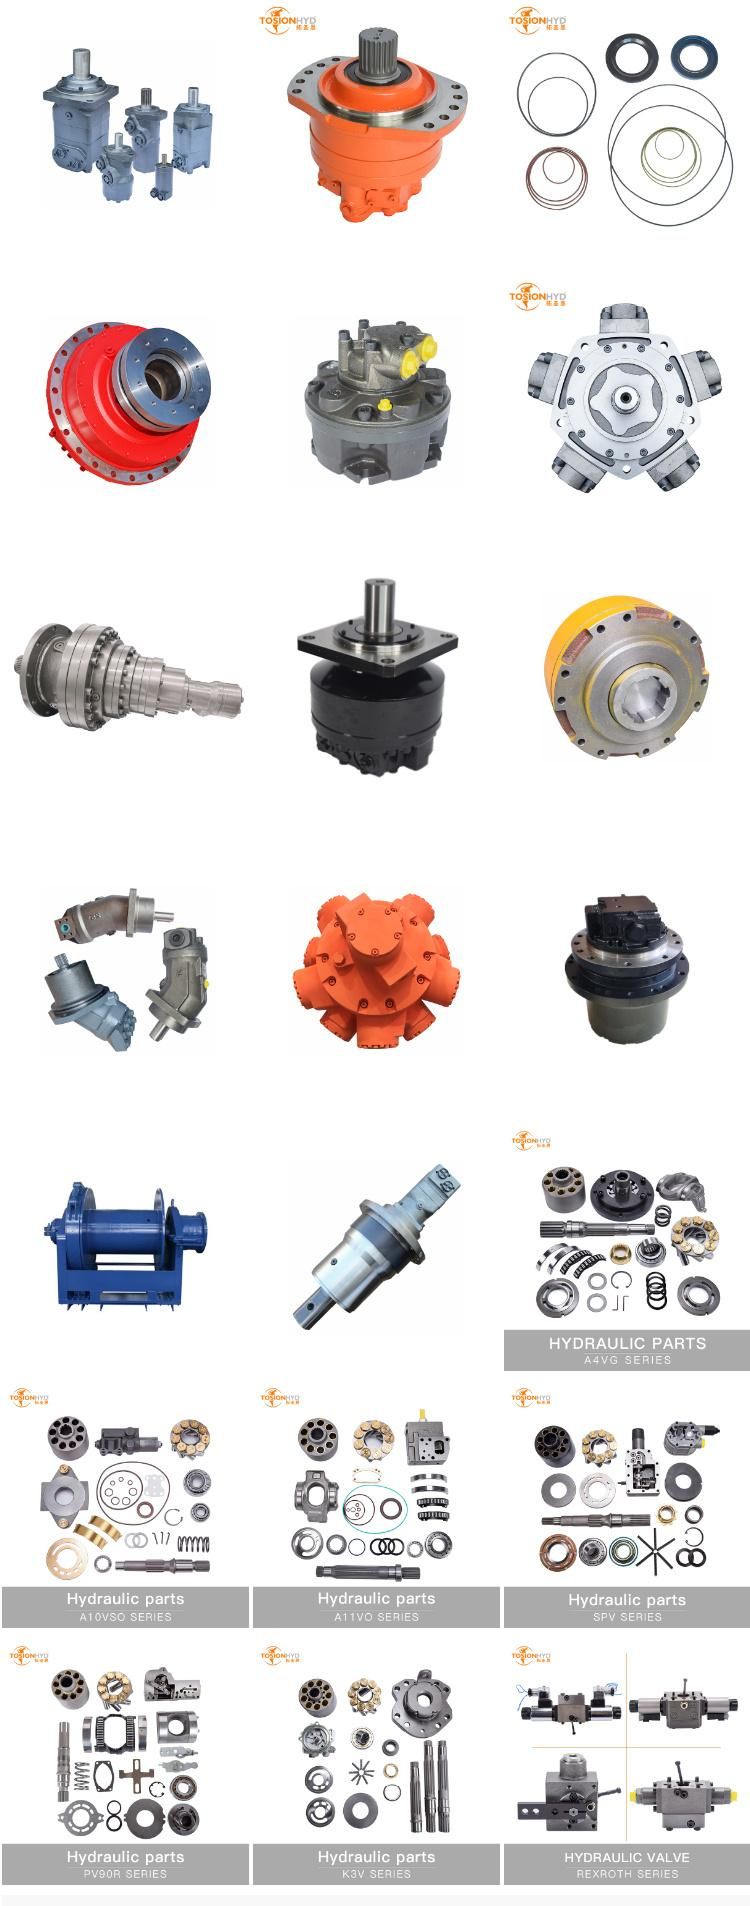 A7vo 80 Hydraulic Pump Parts with Rexroth Spare Repair Kits